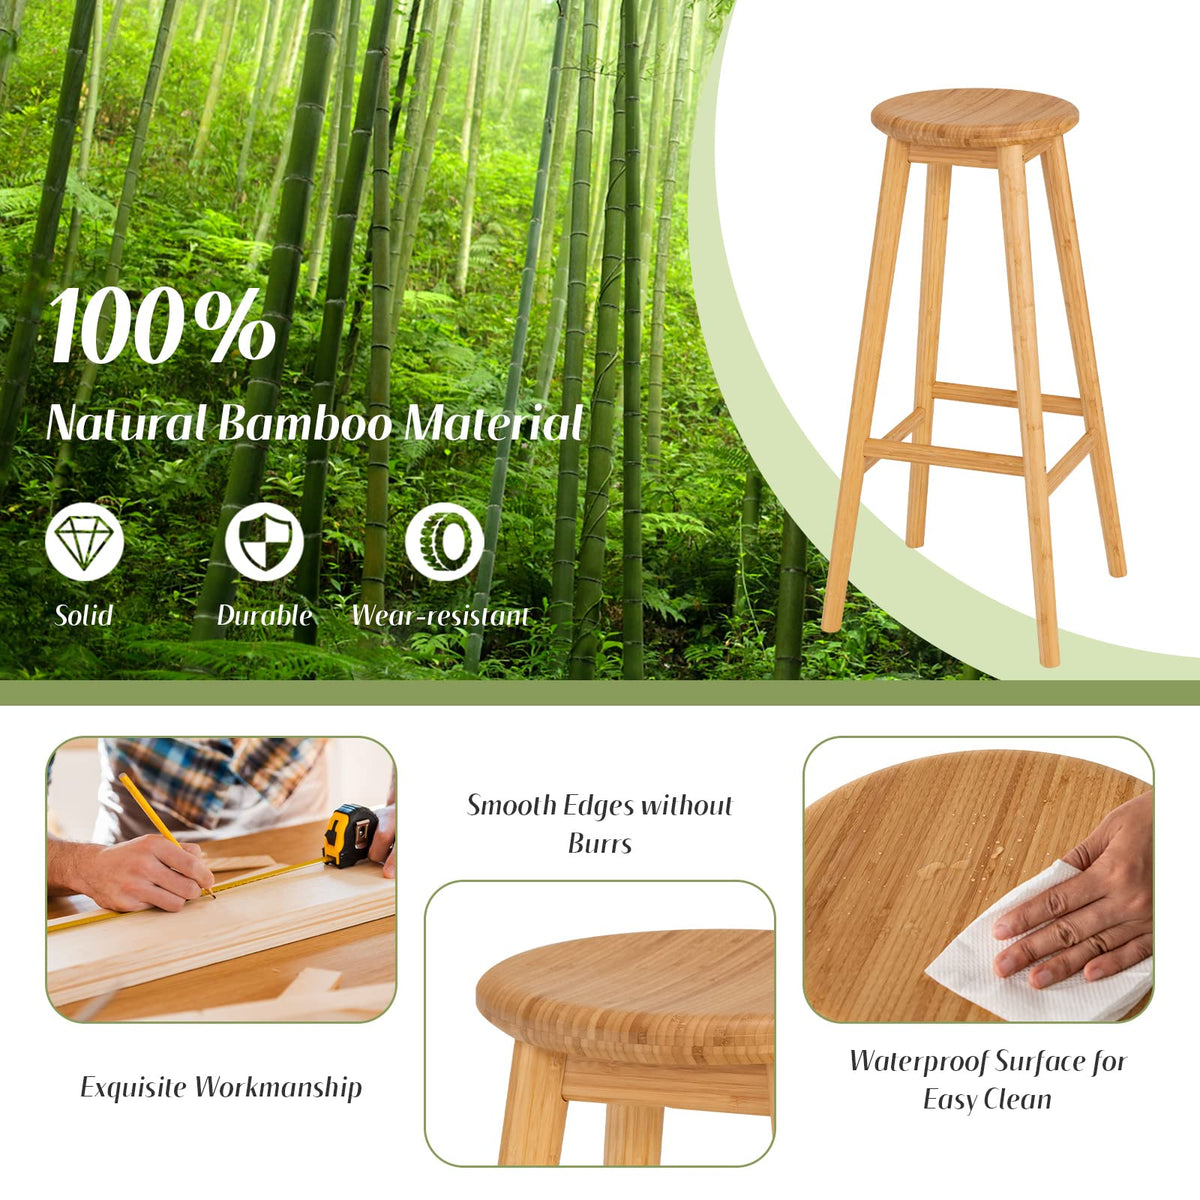 Giantex Bamboo Bar Stools Set of 2, Round Seat Breakfast Dining Chairs w/Footrest, Natural